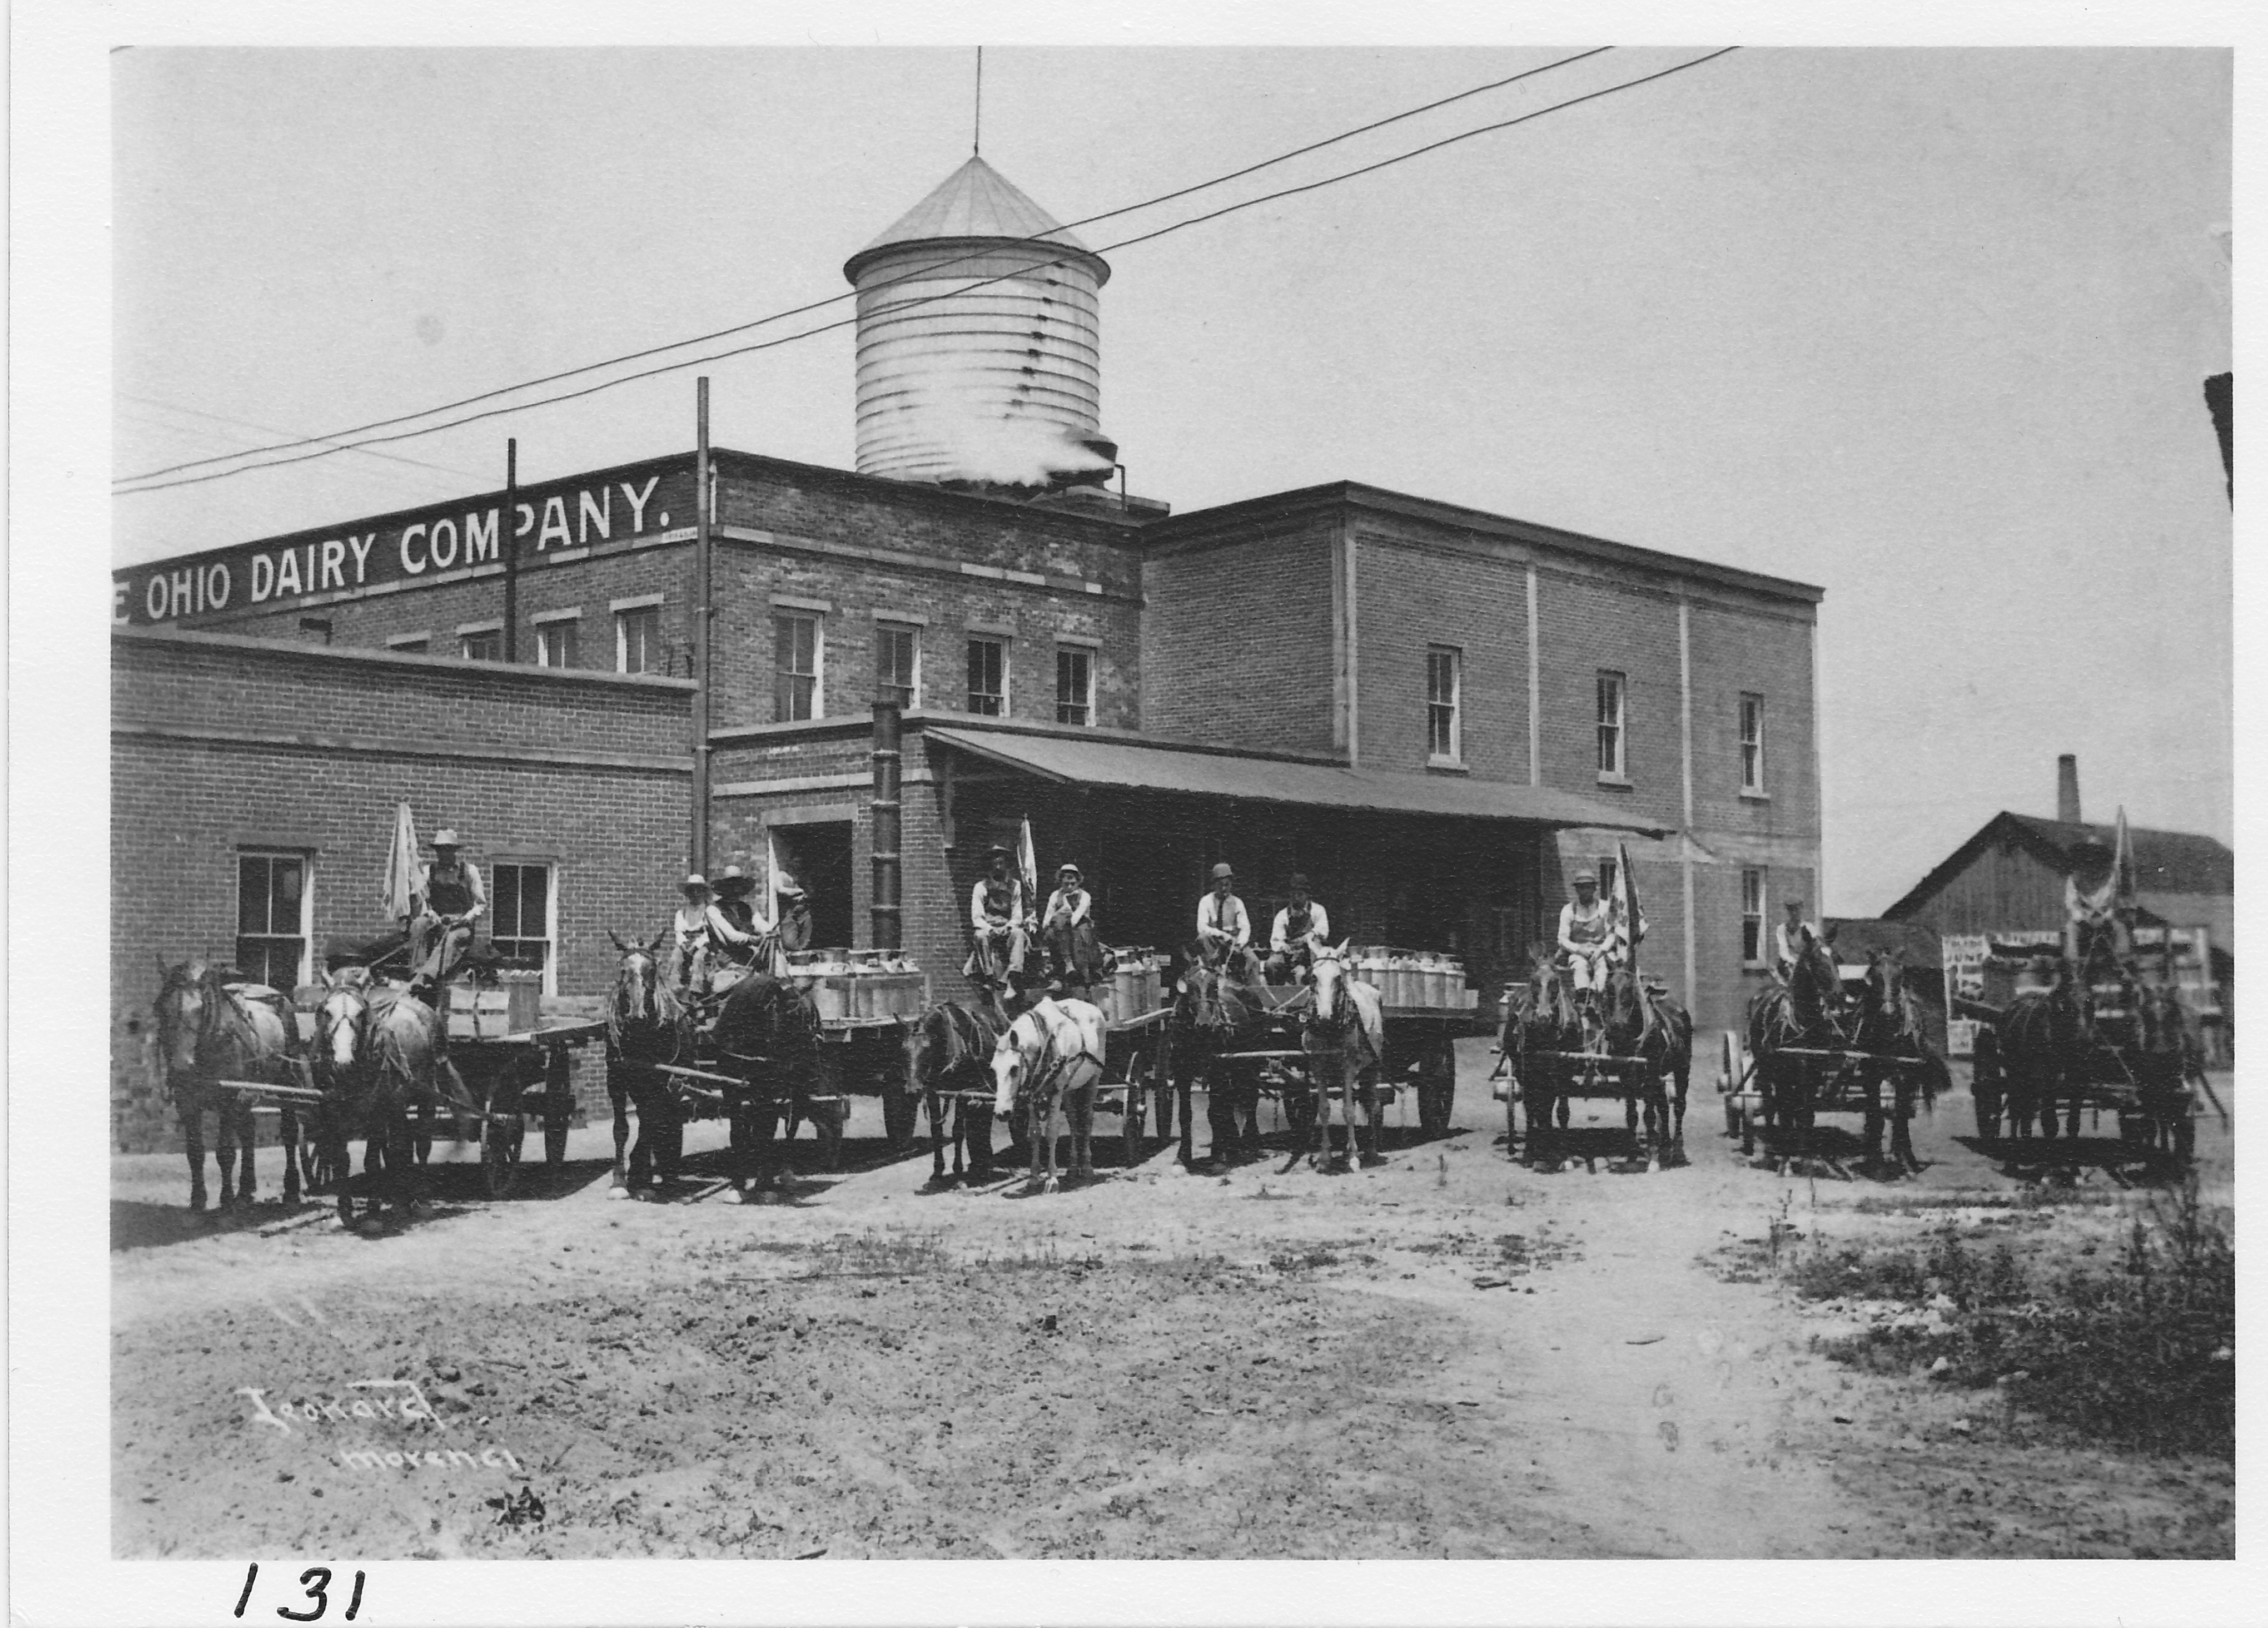 Ohio Dairy Company, east side view off Locust Street with milk hauling teams.